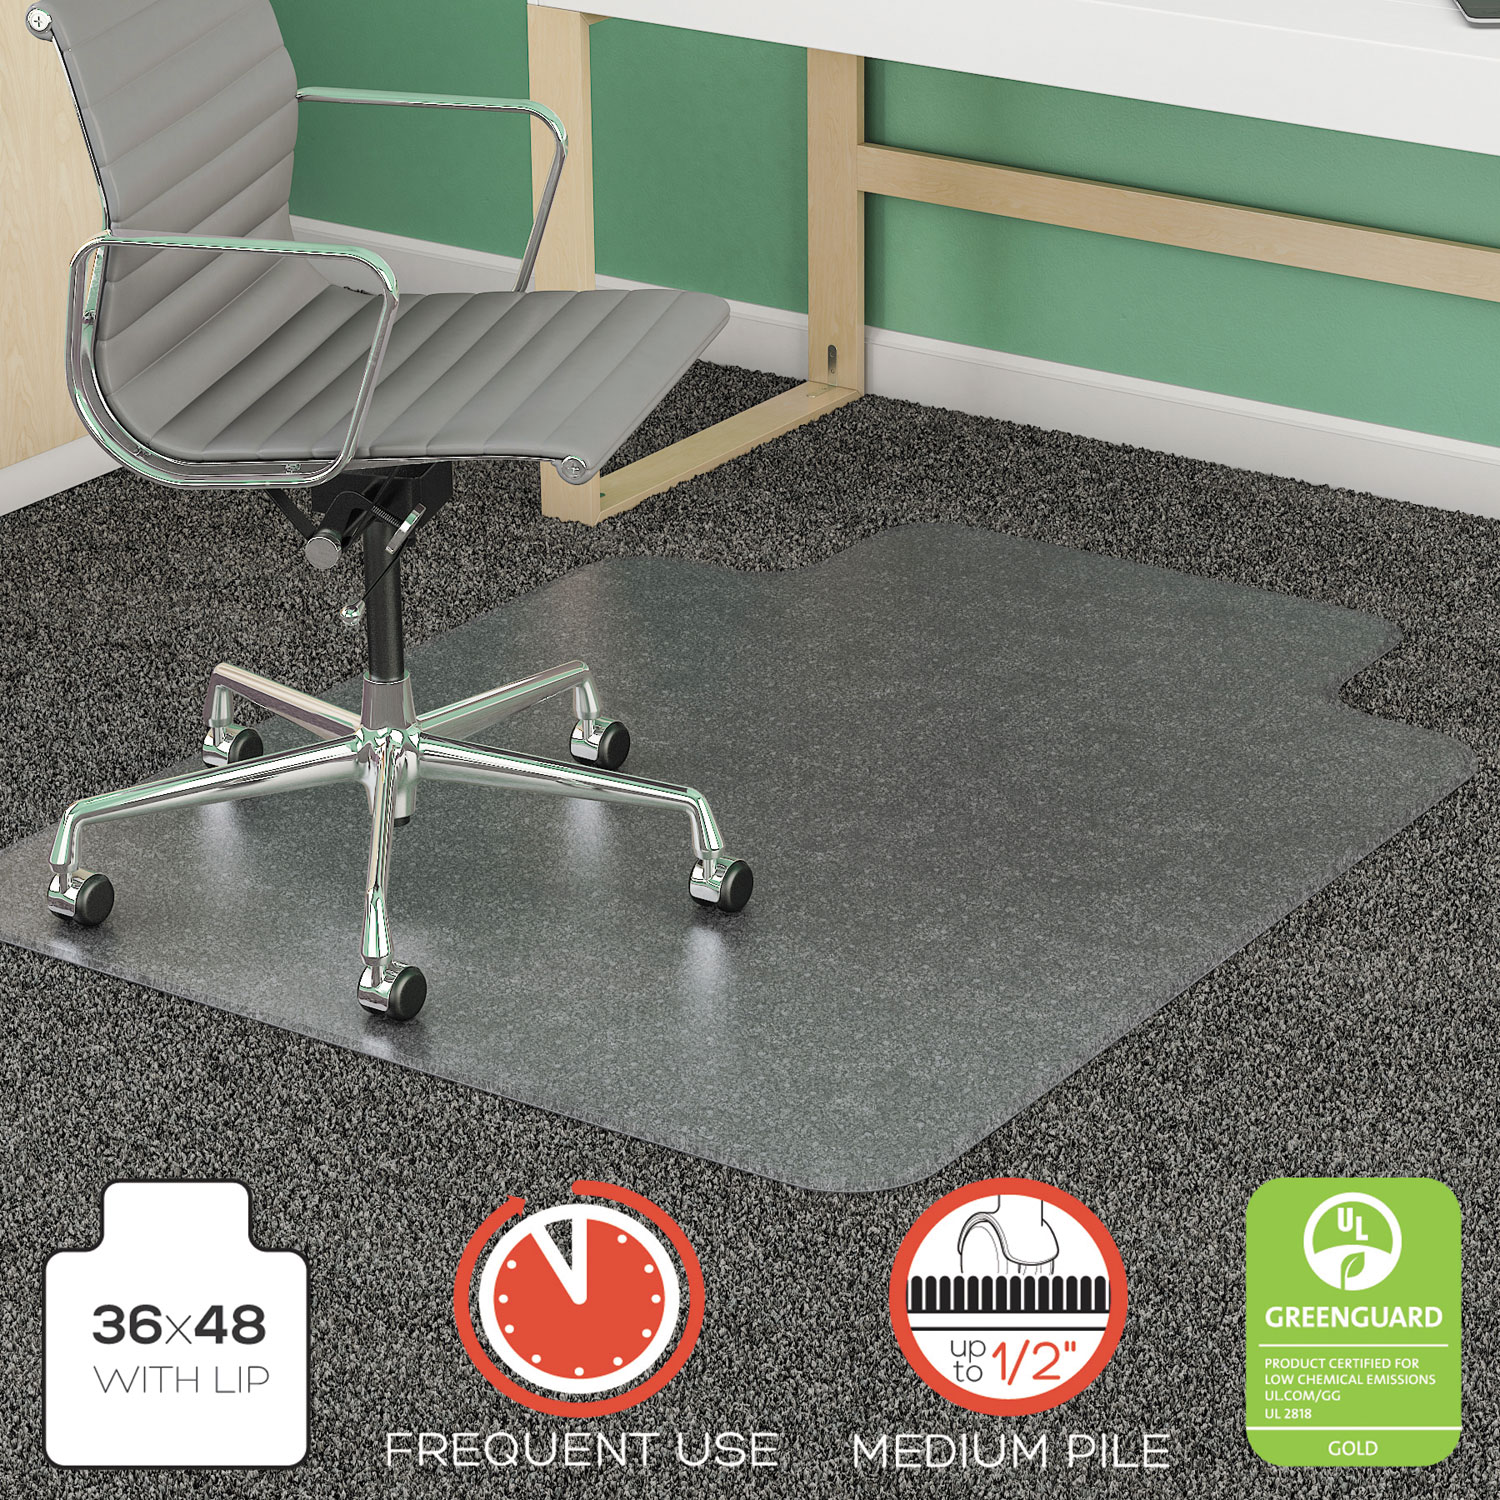 SuperMat Frequent Use Chair Mat, Med Pile Carpet, Roll, 36 x 48, Lipped, CR